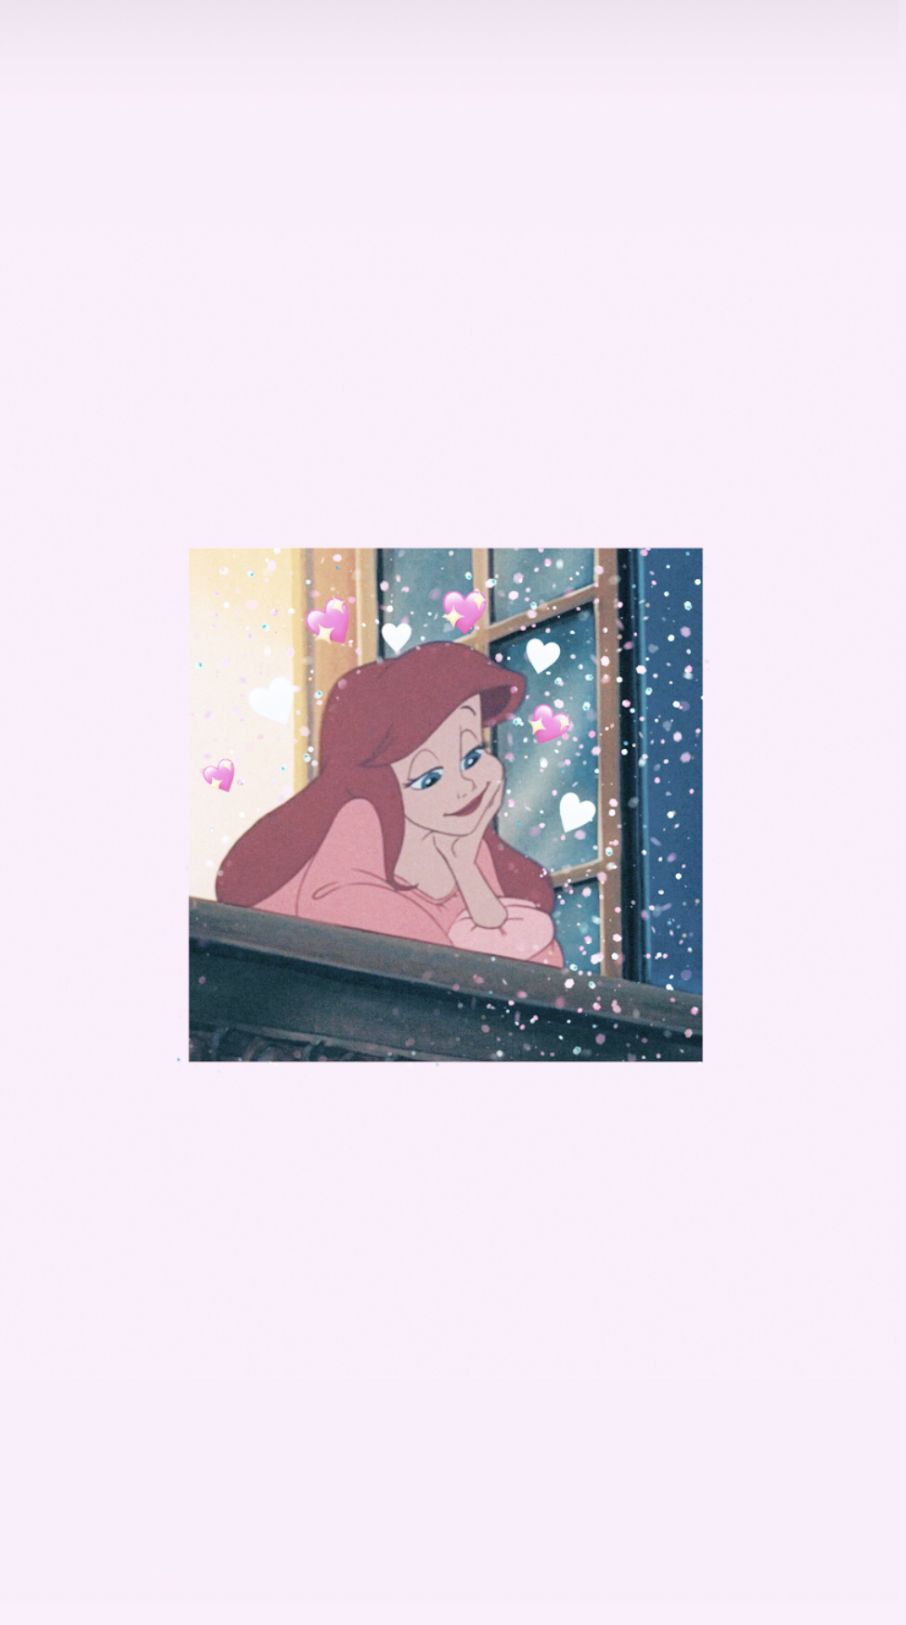 A cartoon of an animated character in the snow - Ariel, mermaid